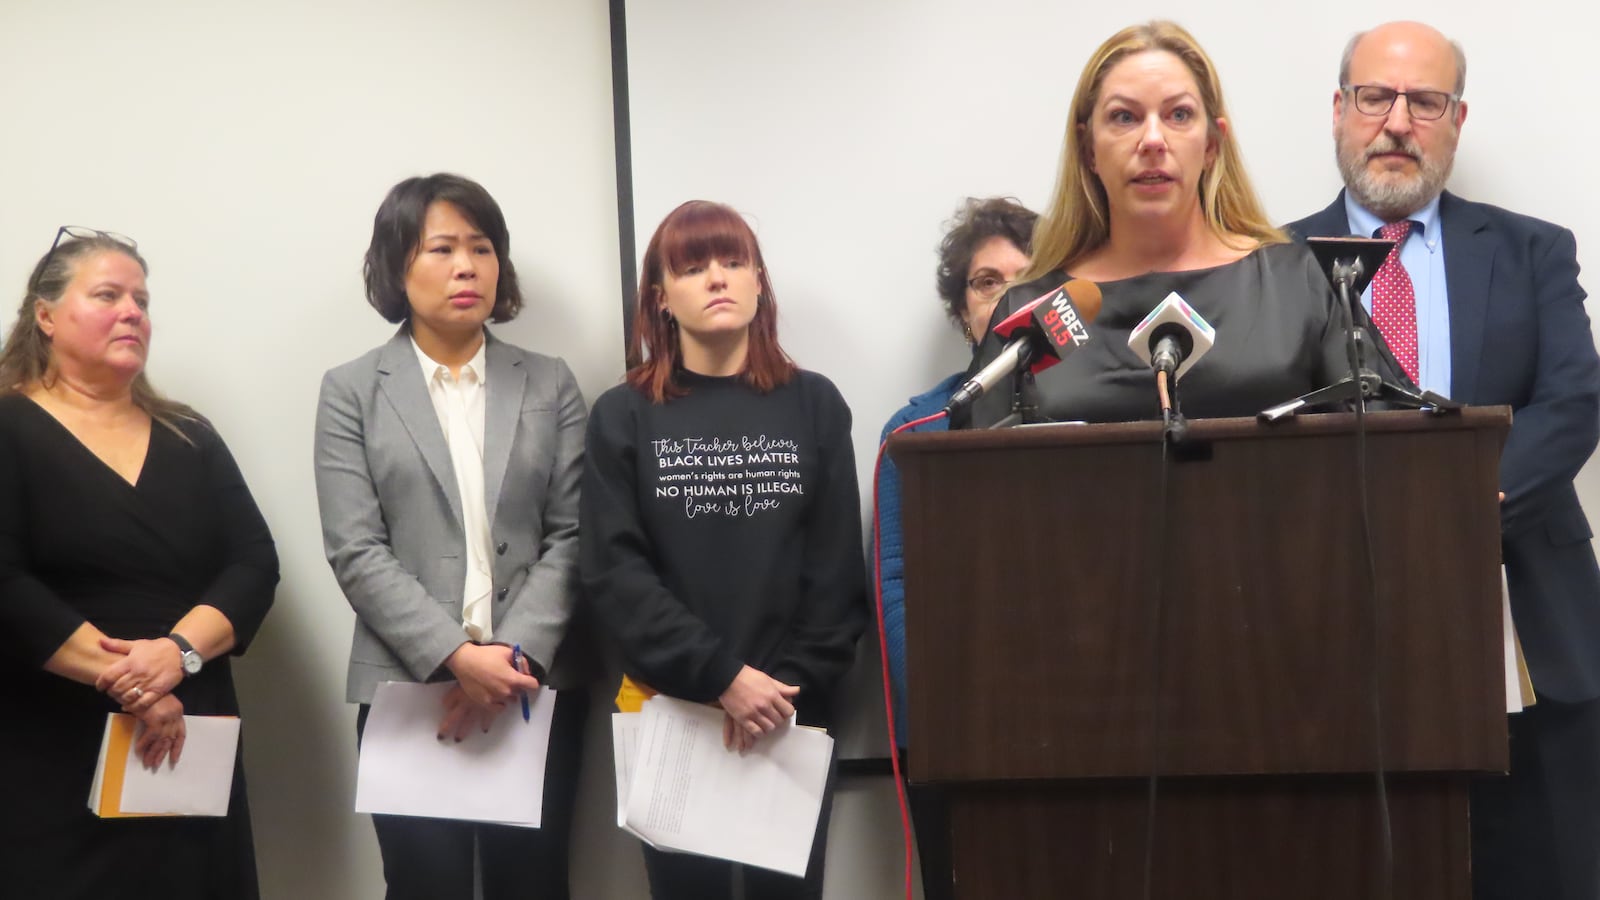 Laurel Henson, at the podium, spoke at a press conference in Chicago on Nov. 12, 2018, about her 2-year struggle to get a school nurse on staff to help her son, who suffers from seizures.